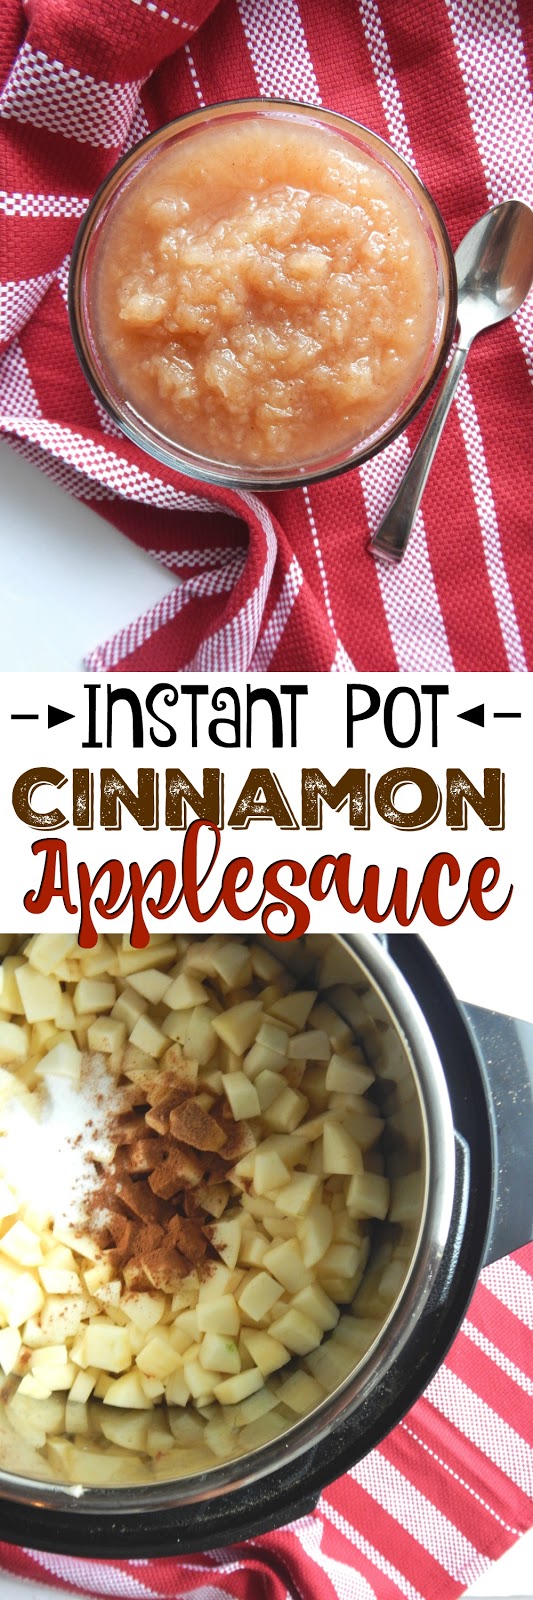 Instant Pot Cinnamon Applesauce...let the Instant Pot do the work!  Homemade cinnamon applesauce comes together in under 30 minutes - start to finish.  Sweet applesauce is the perfect Fall snack! (sweetandsavoryfood.com)